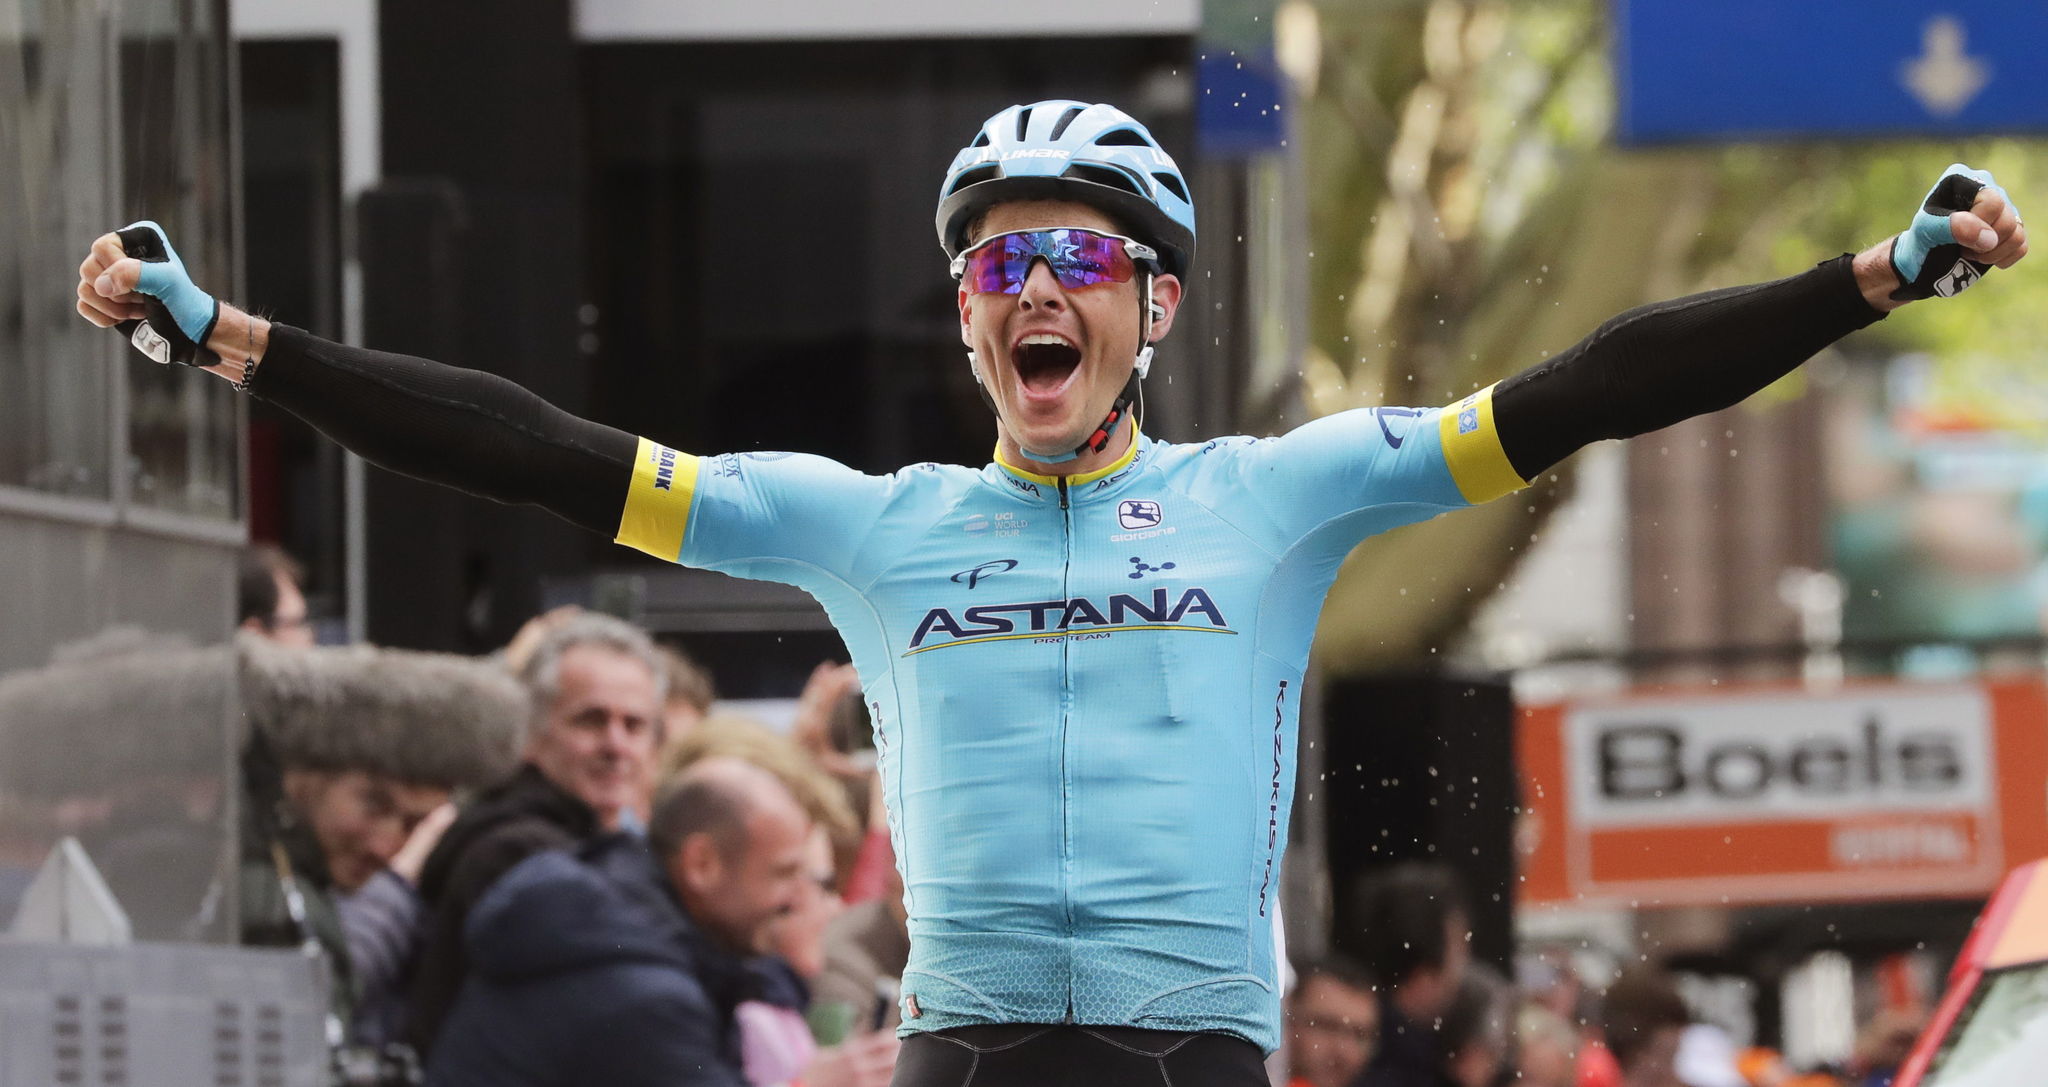 Liege (Belgium), 28/04/2019.- Danish rider Jakob <HIT>Fuglsang</HIT> of the Astana Pro Team celebrates while crossing the finish line to win the Liege Bastogne Liege one day classic cycling race in Liege, Belgium, 28 April 2019. (Ciclismo, Bélgica, Lieja) EFE/EPA/JULIEN WARNAND